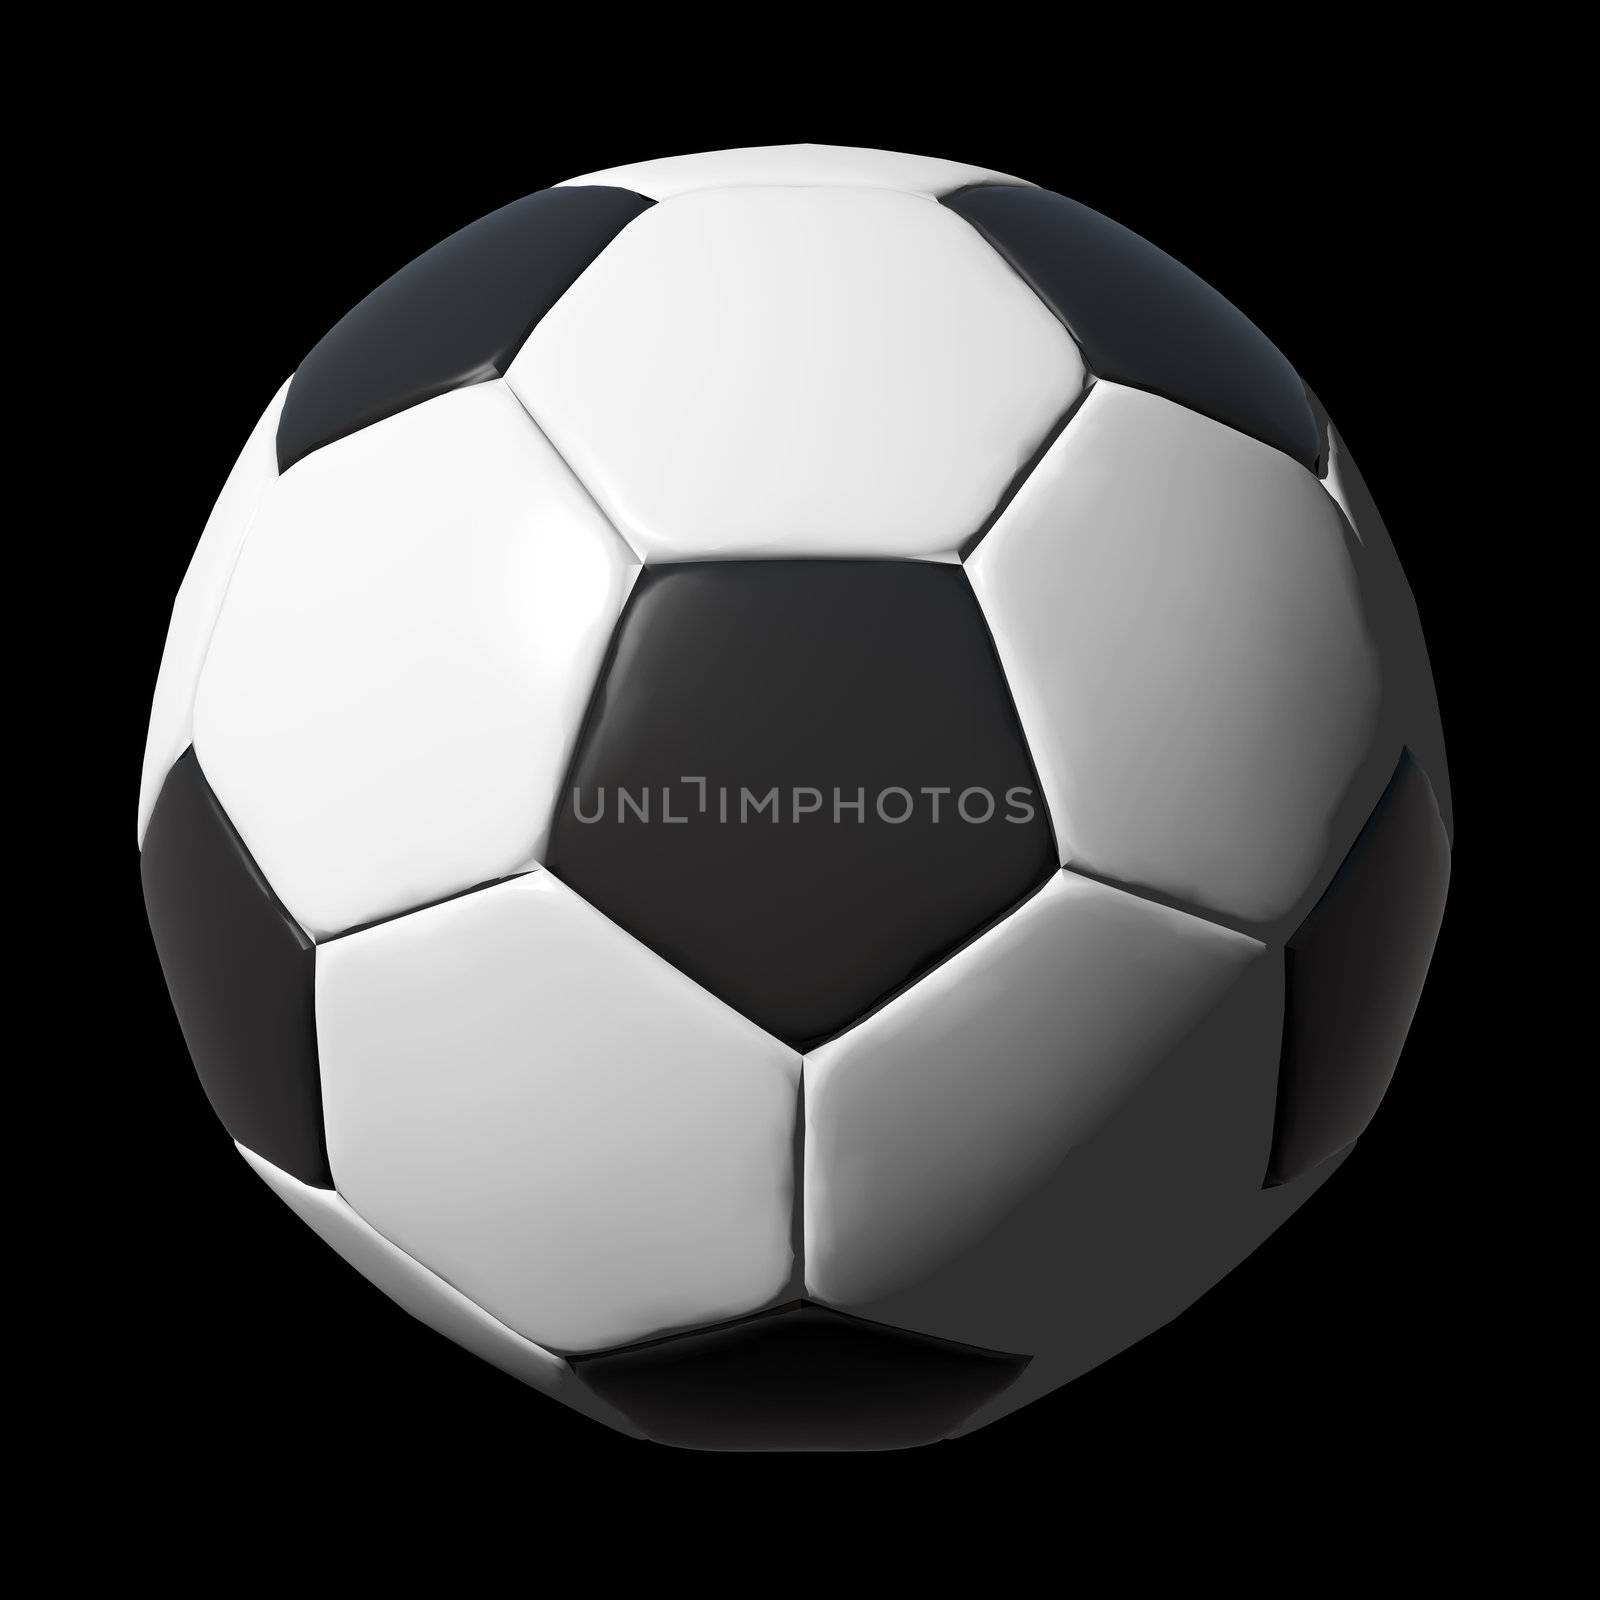 Leather soccer ball isolated on black background.